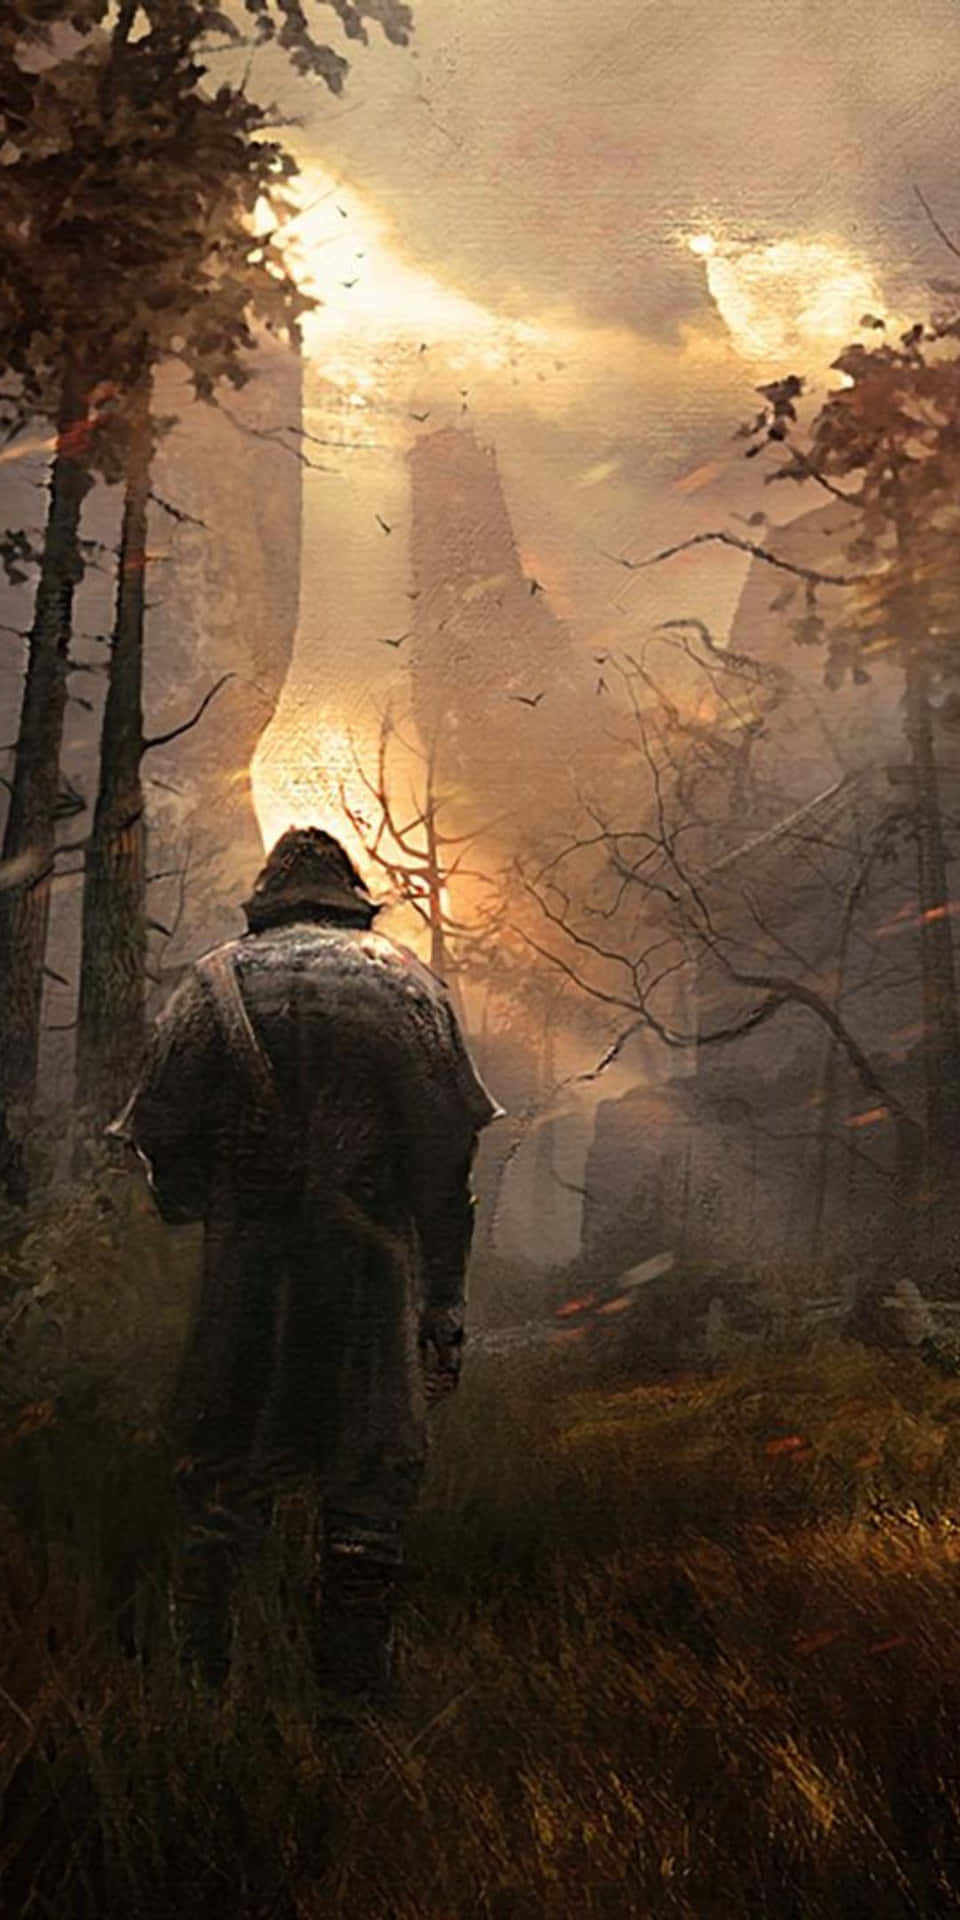 Dive into the mysterious world of Greedfall, available now on Pixel 3